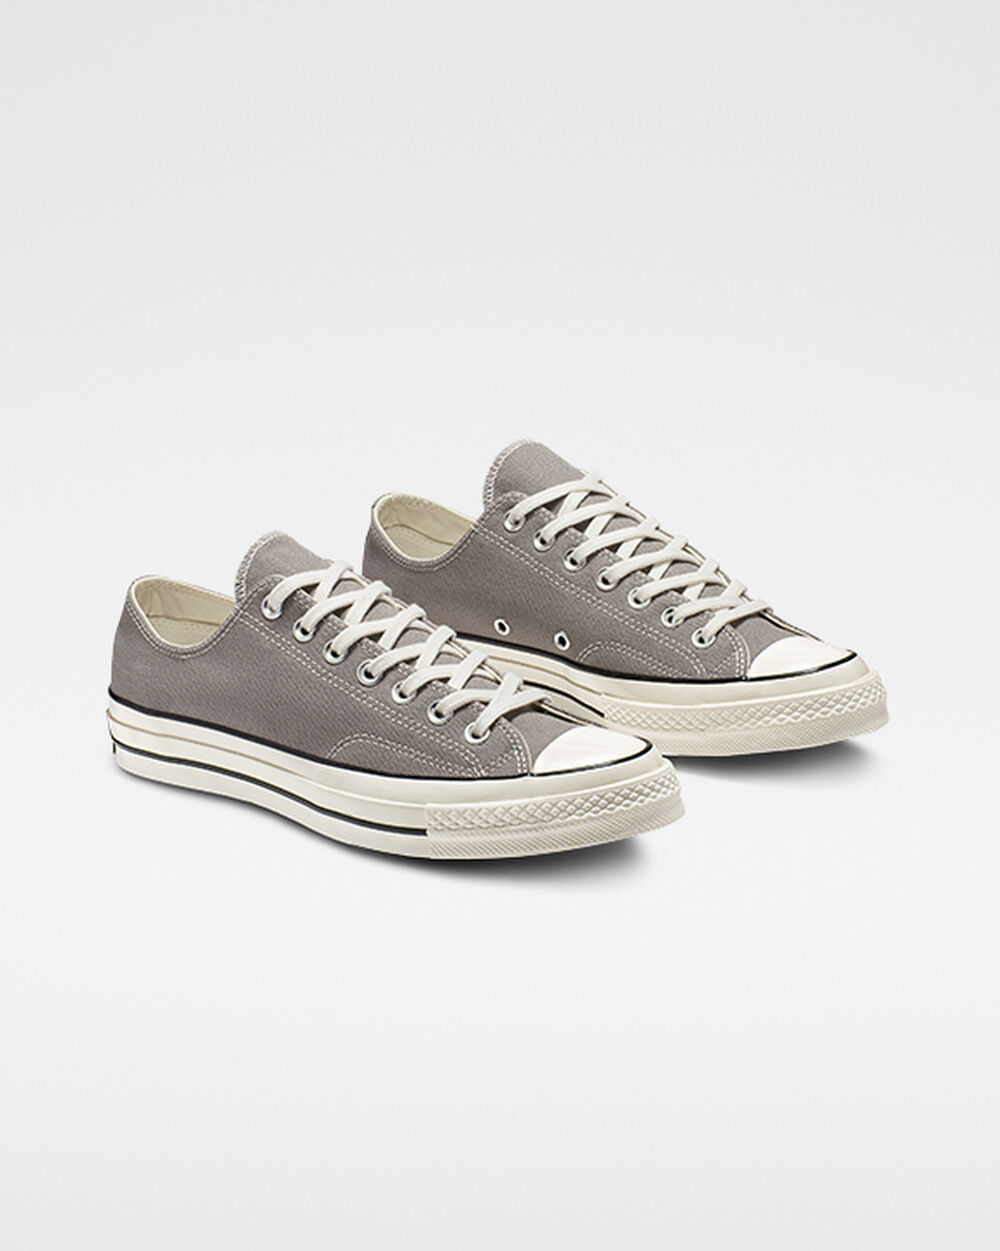 Tenis Converse Chuck 70 Mujer Grises Blancos | Mexico-263176